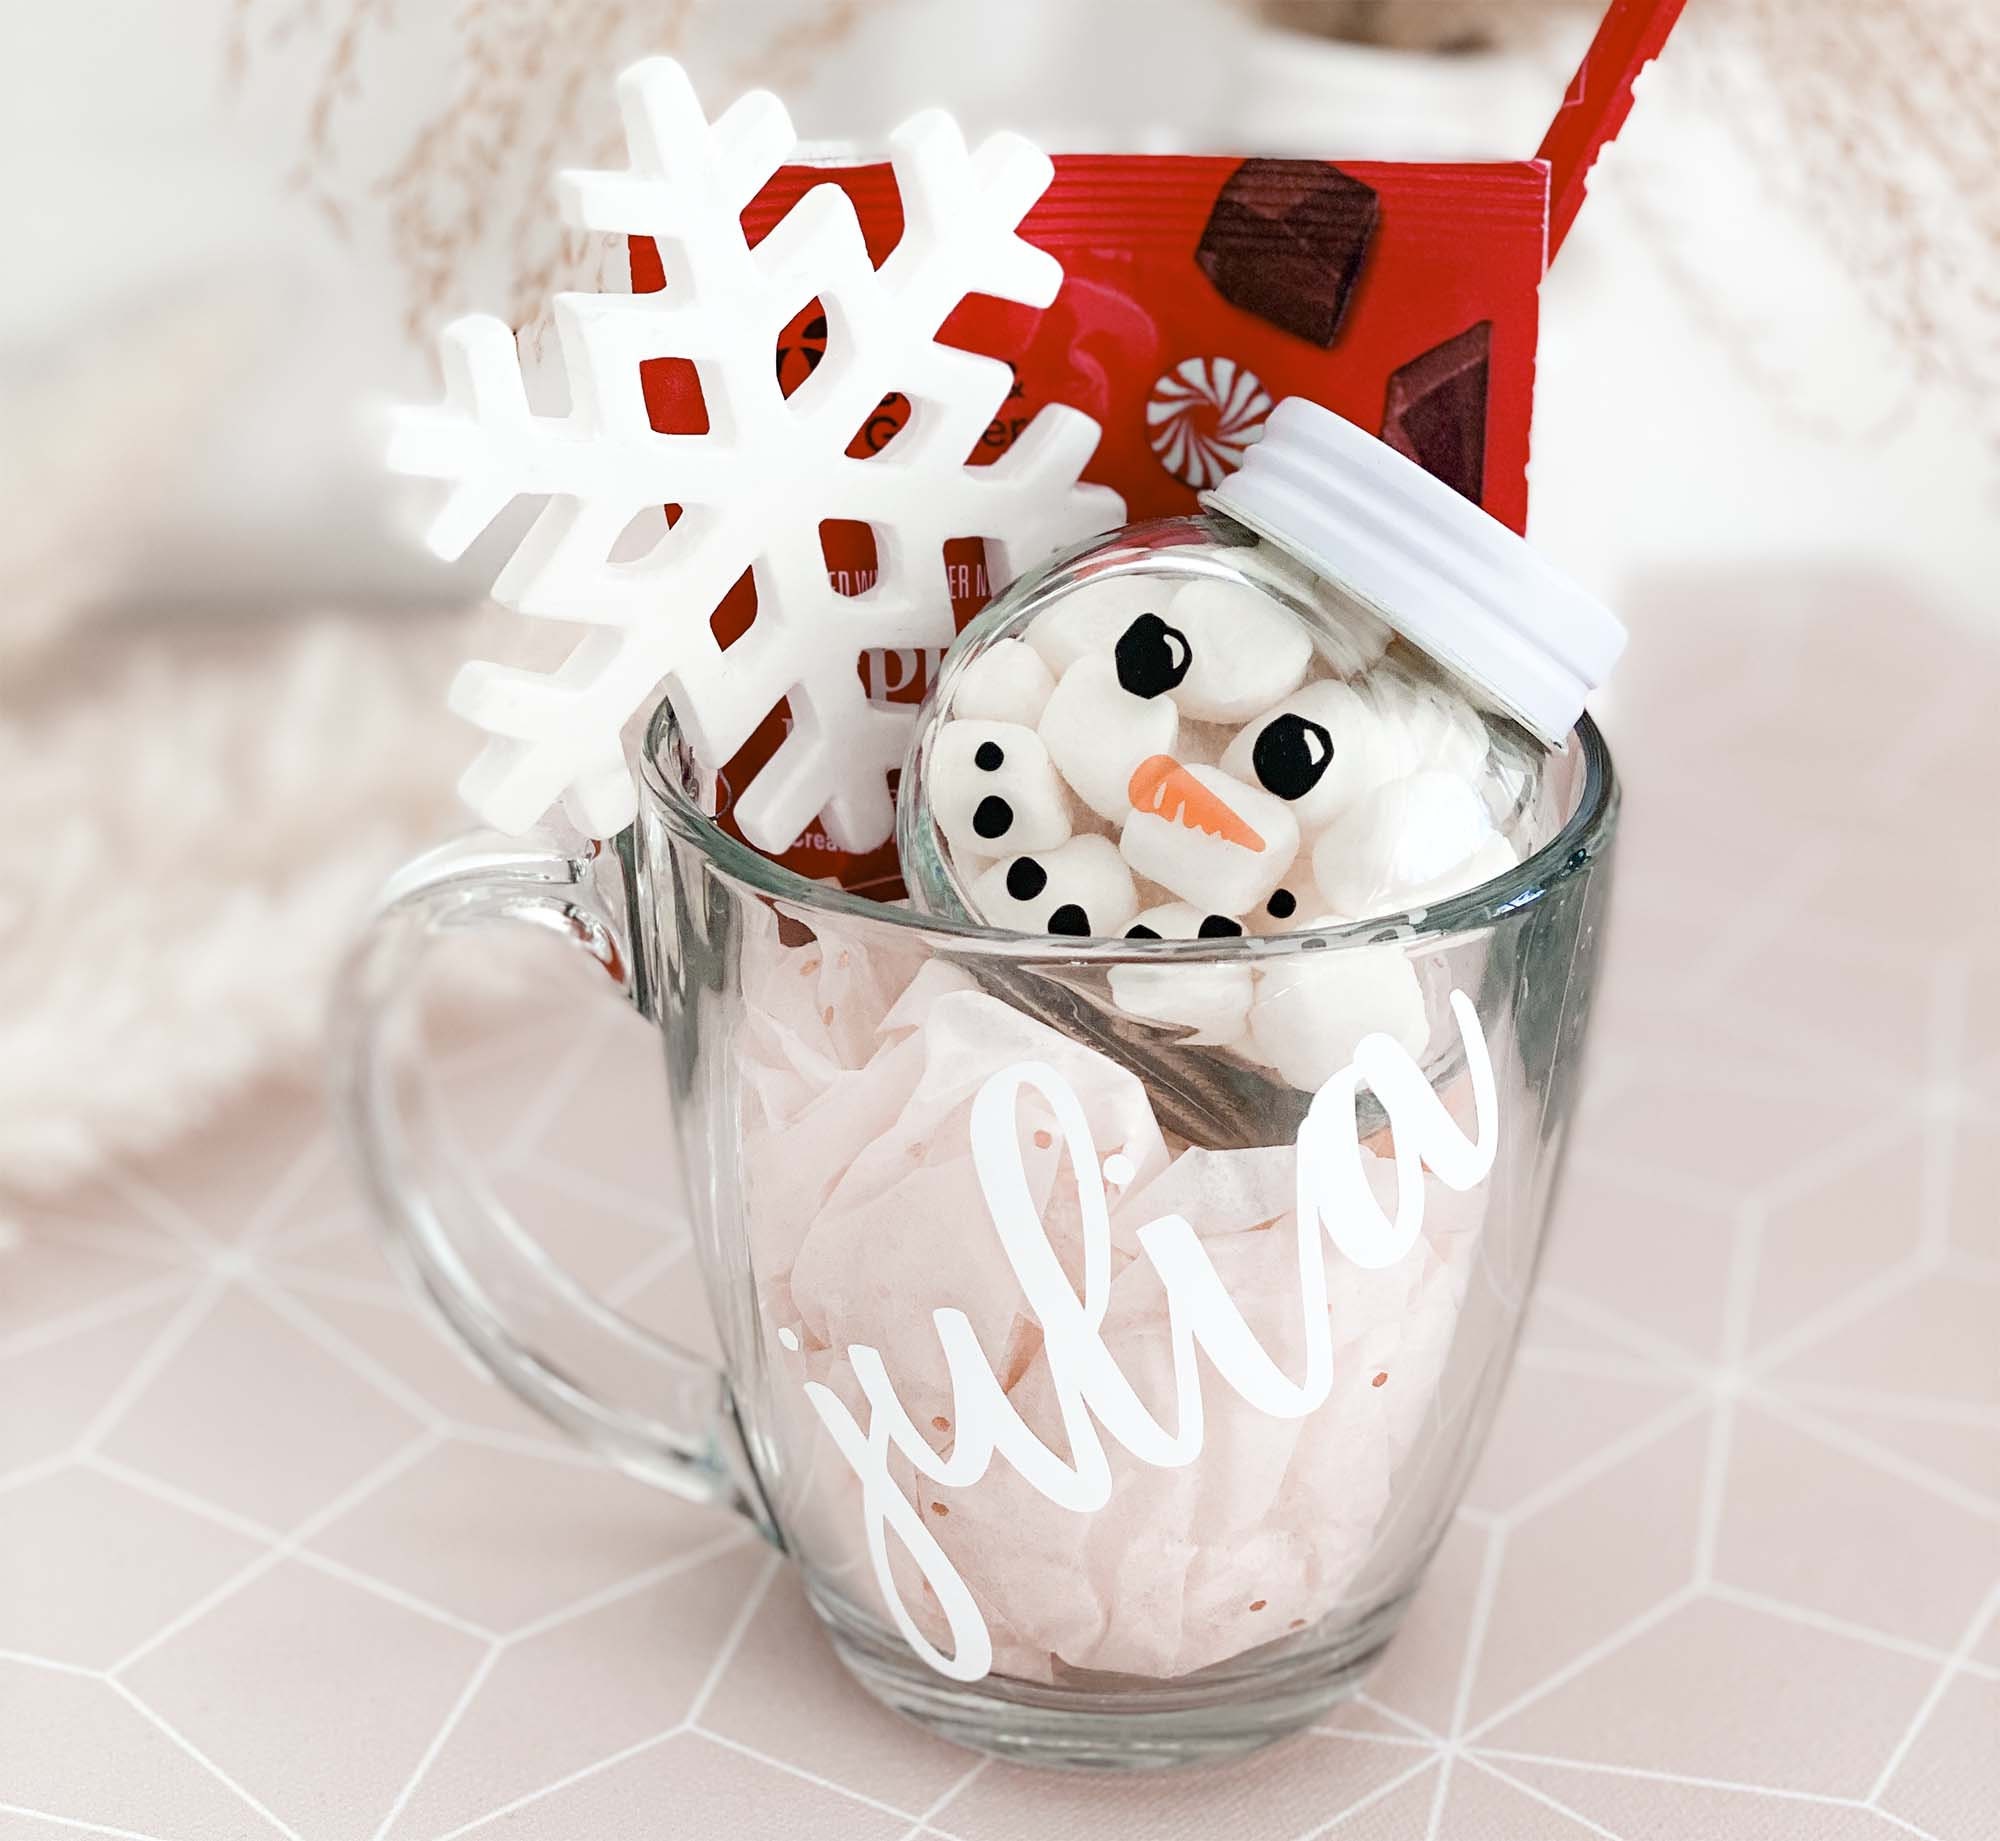 Snowman 12 Pc Hot Cocoa Set in Gift Box Includes: 6 Vanilla Marshmallow  Toppers and 6 Peppermint Candy Cane Stirrers - Kademi